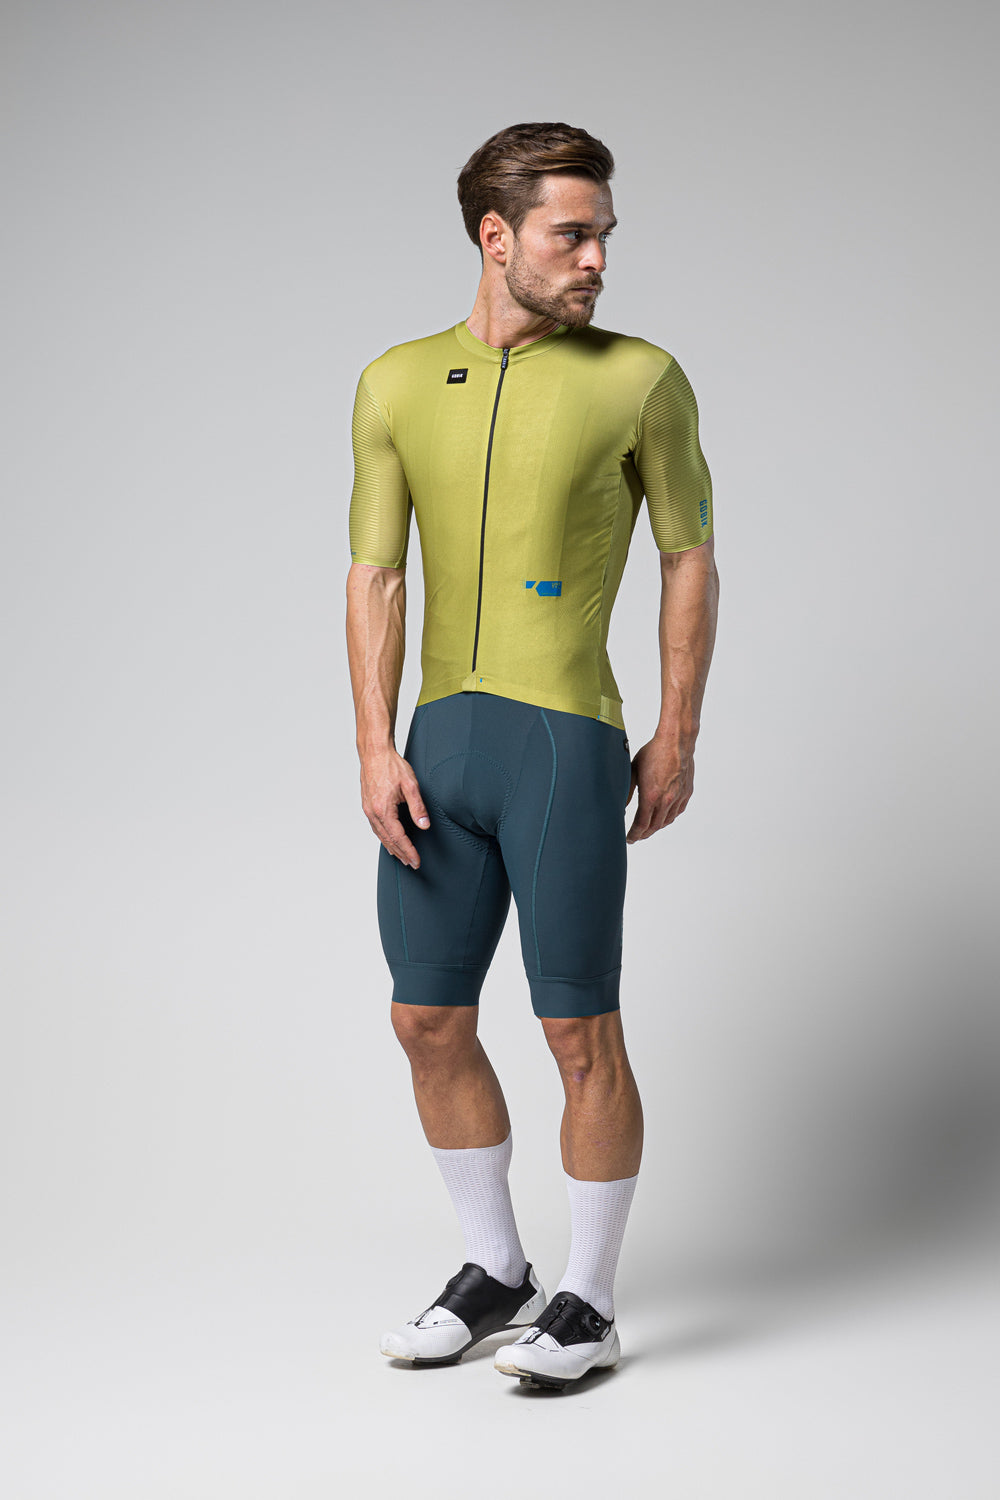 MAILLOT MANCHES COURTES MAGNITUDE HOMME SPLIT GREEN